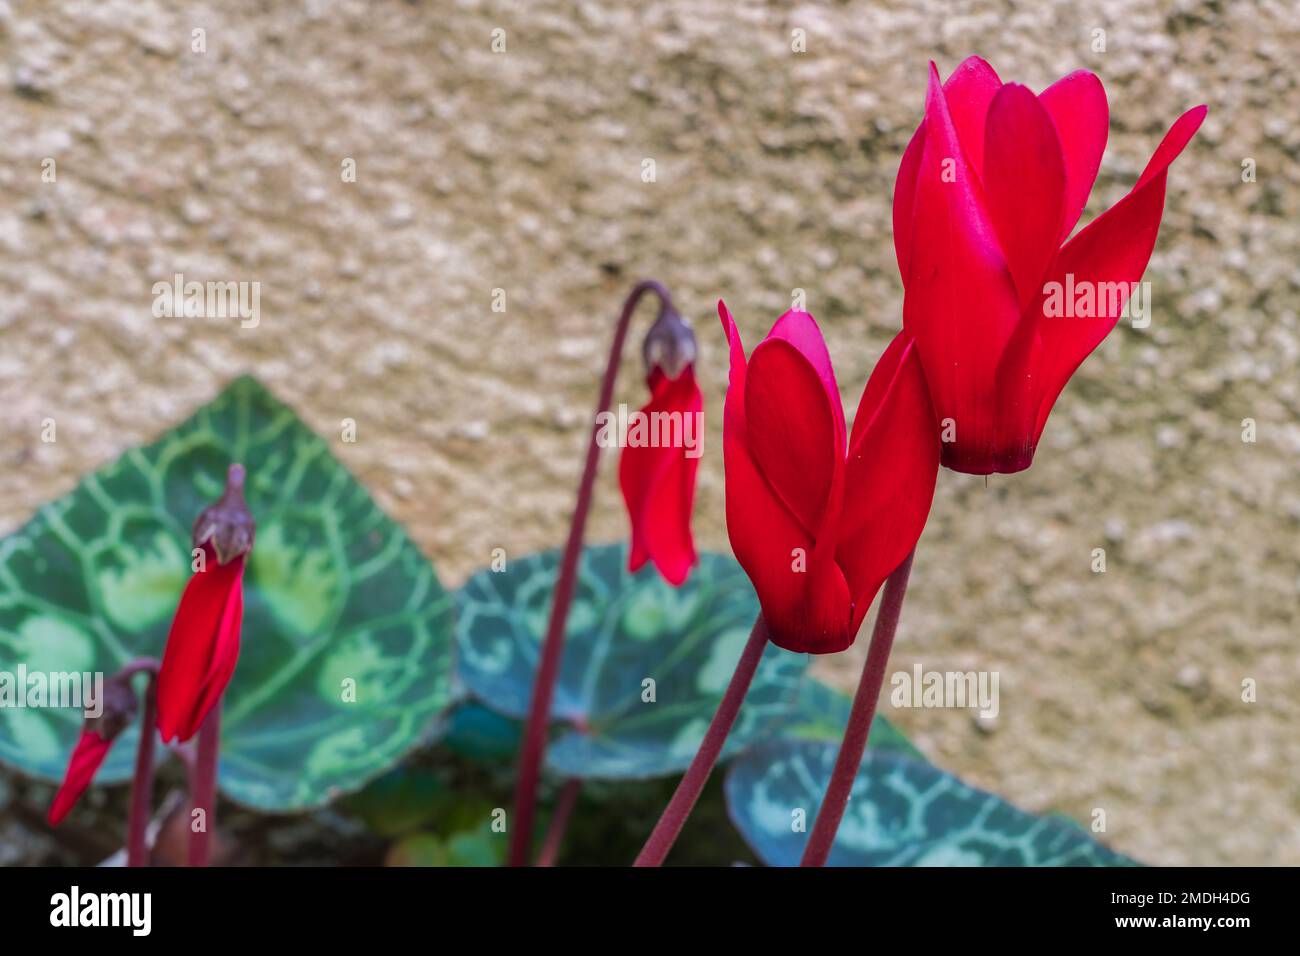 Closeup view of bright red cyclamen flowers blooming outdoors in winter garden Stock Photo